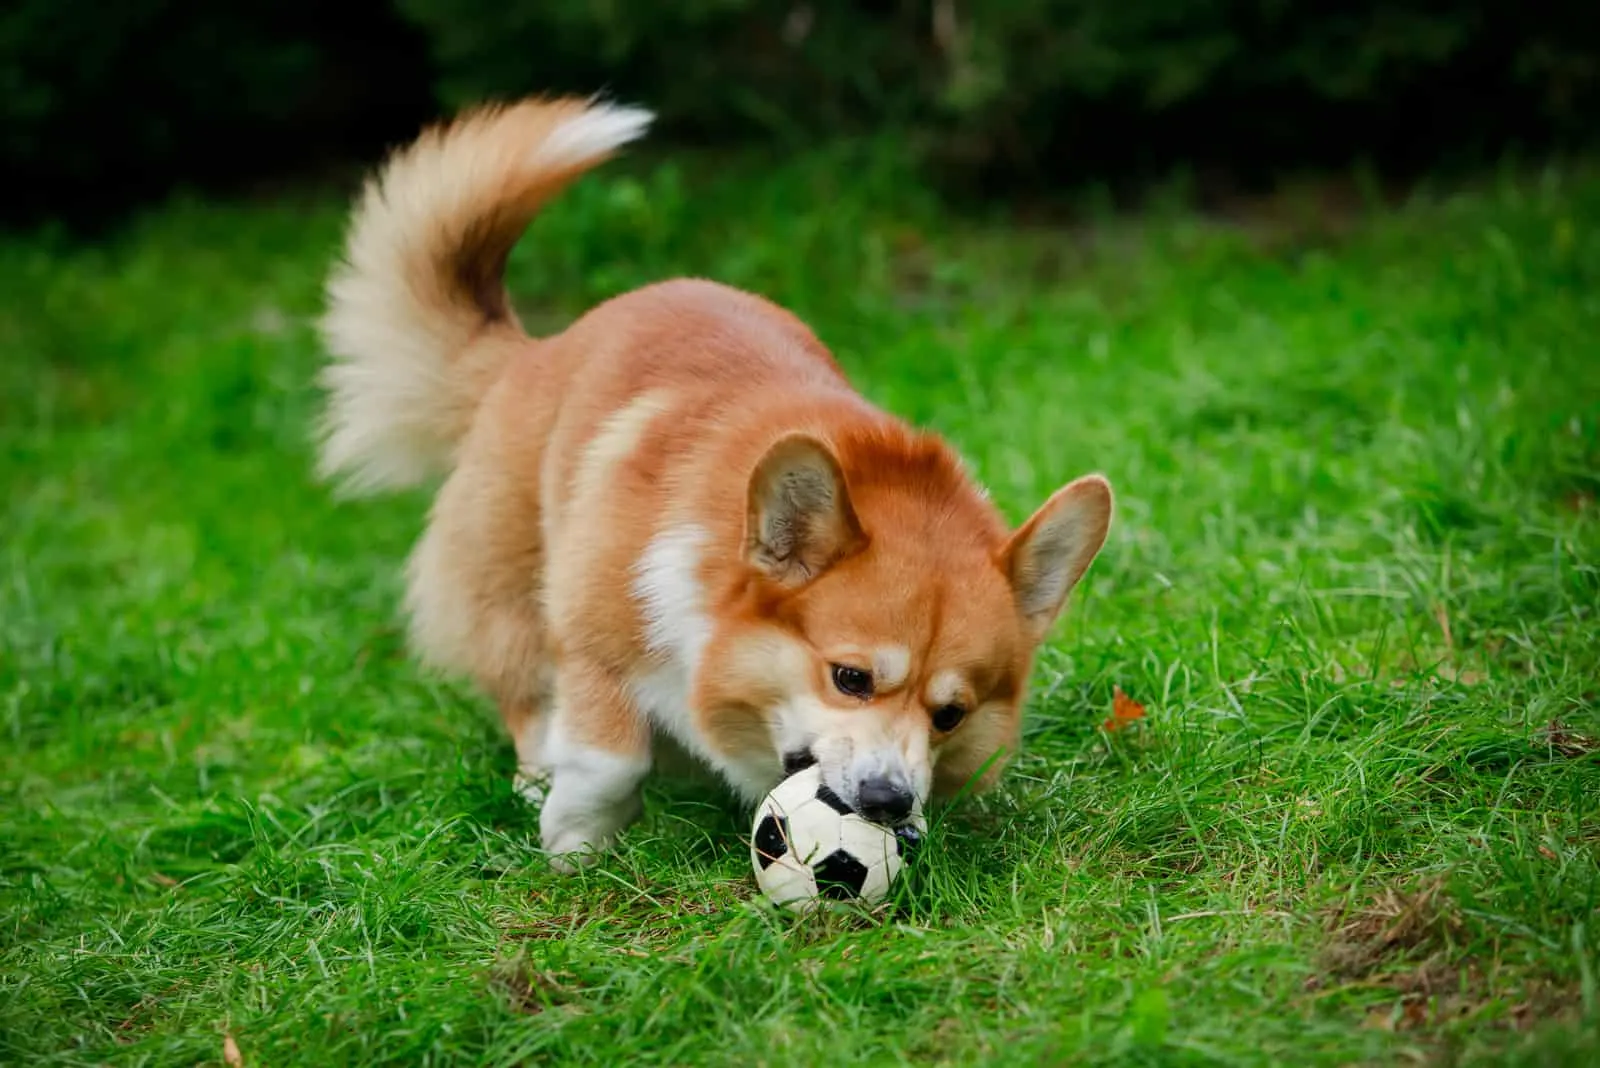 corgi is played with a ball on a green surface